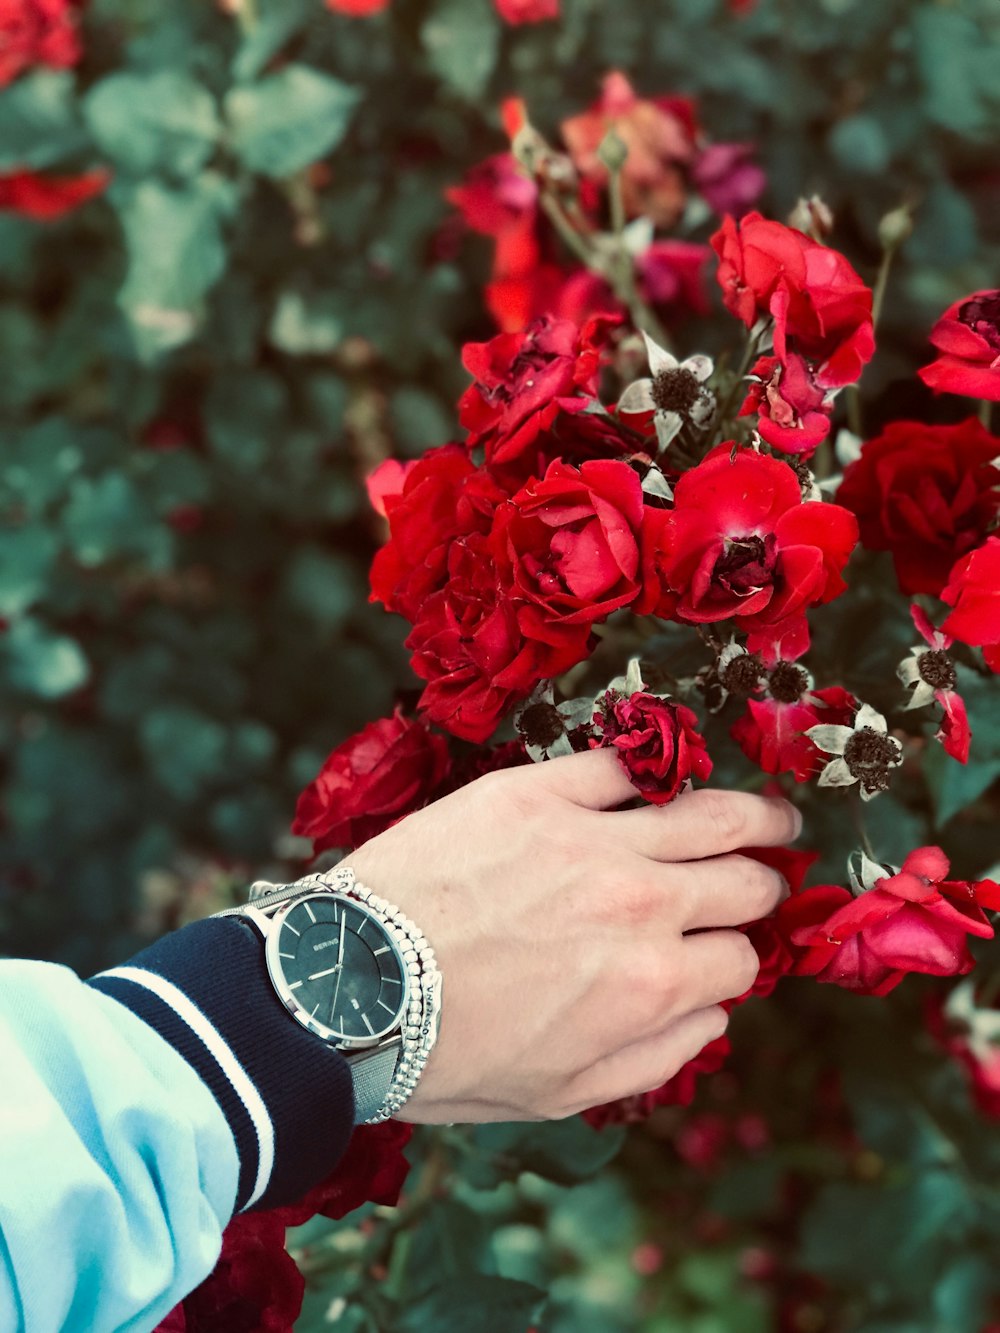 person wearing watch holding red petaled flower